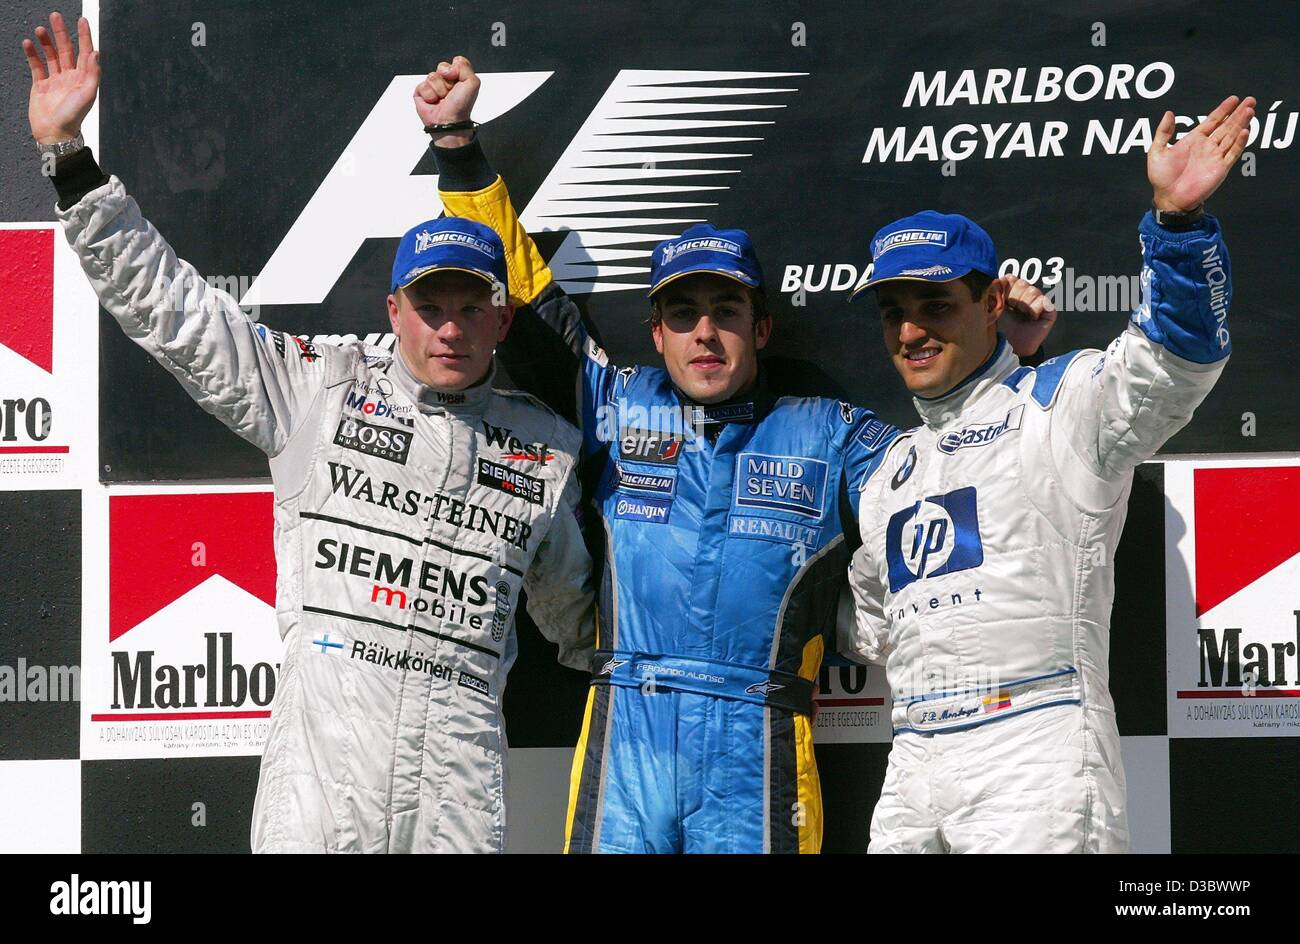 (dpa) - Spain's Fernando Alonso of Renault (C) is flanked by second placed Finnish Kimi Raeikkoenen (L) of McLaren-Mercedes and third placed Colombian Juan Pablo Montoya of BMW-Williams after the Hungarian Grand Prix in Budapest, 24 August 2003. Alonso made Formula One history by becoming the younge Stock Photo